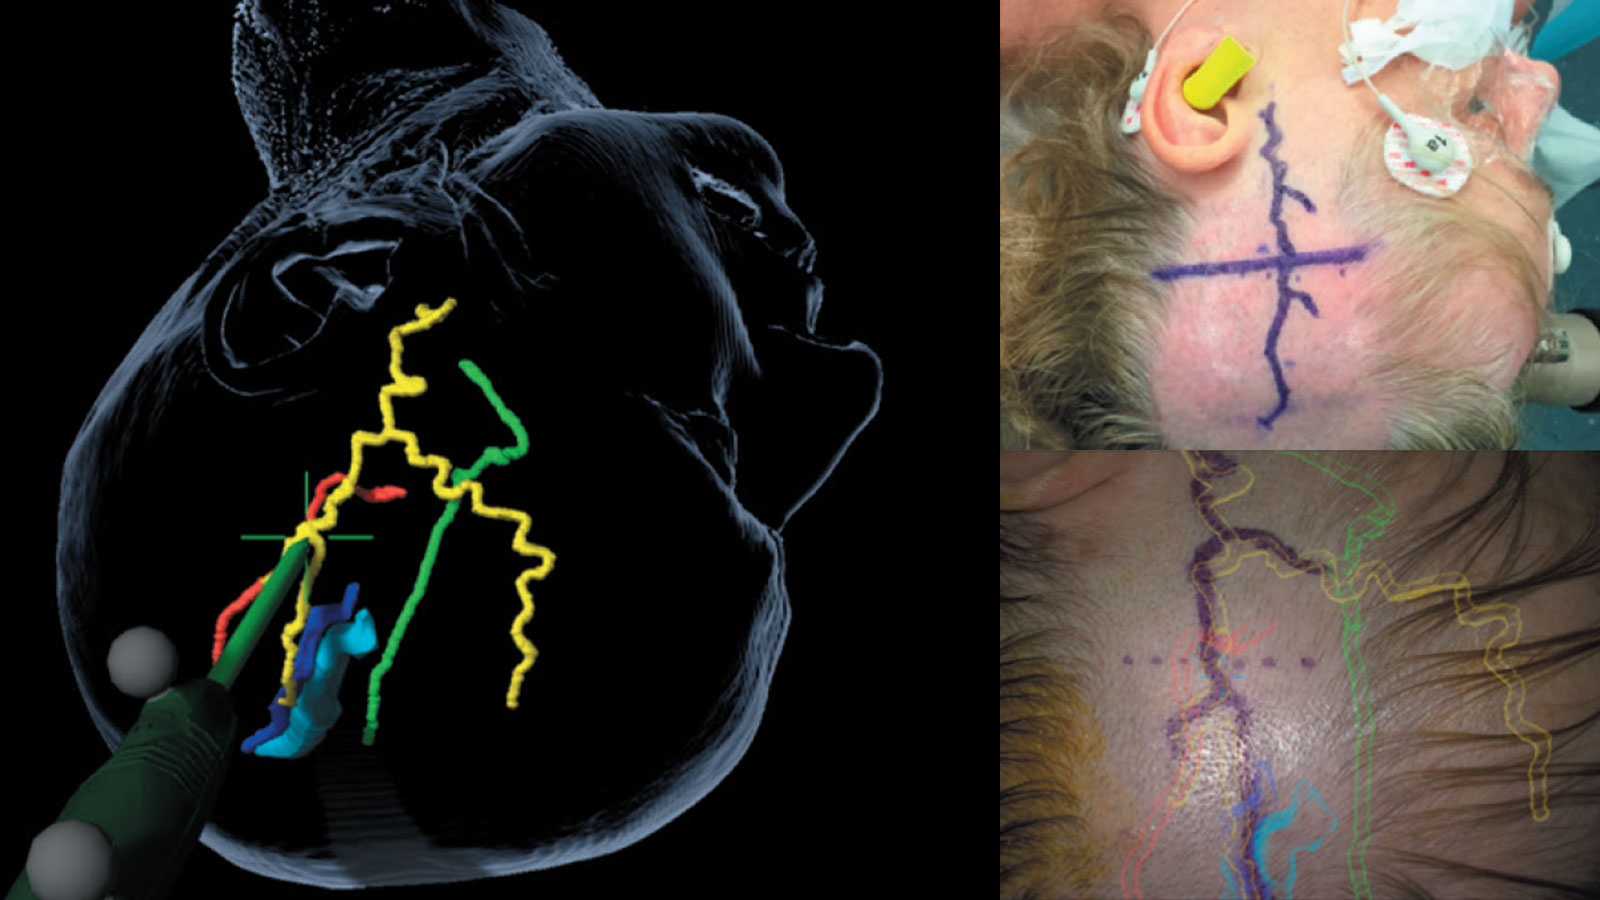 AR during vascular surgery. Right 2 skull photos with drawing. On the left, projection of navigation data